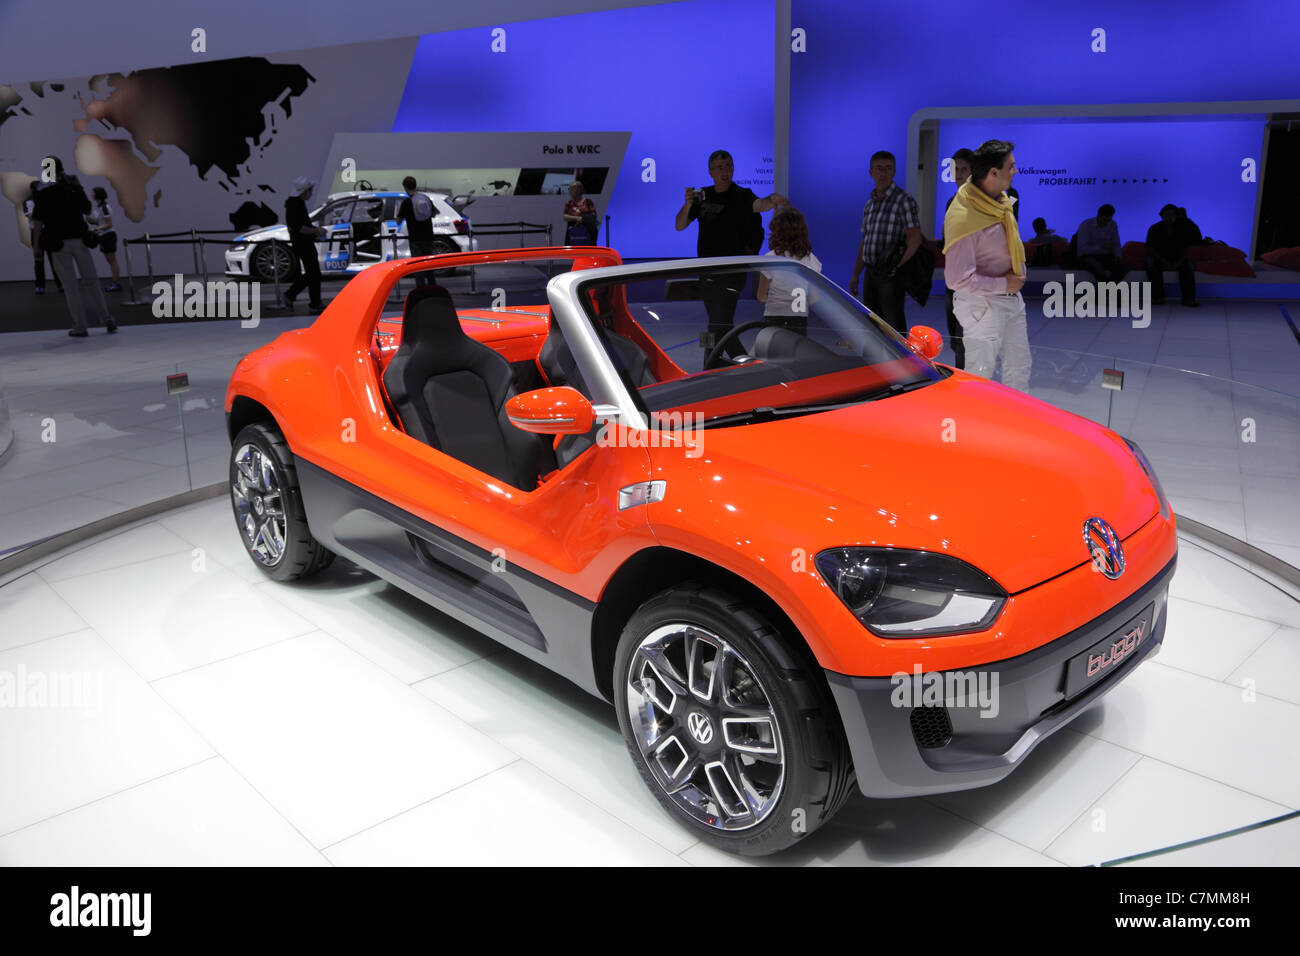 The New VW Buggy at the 64th IAA (Internationale Automobil Ausstellung) on September 24, 2011 in Frankfurt Stock Photo